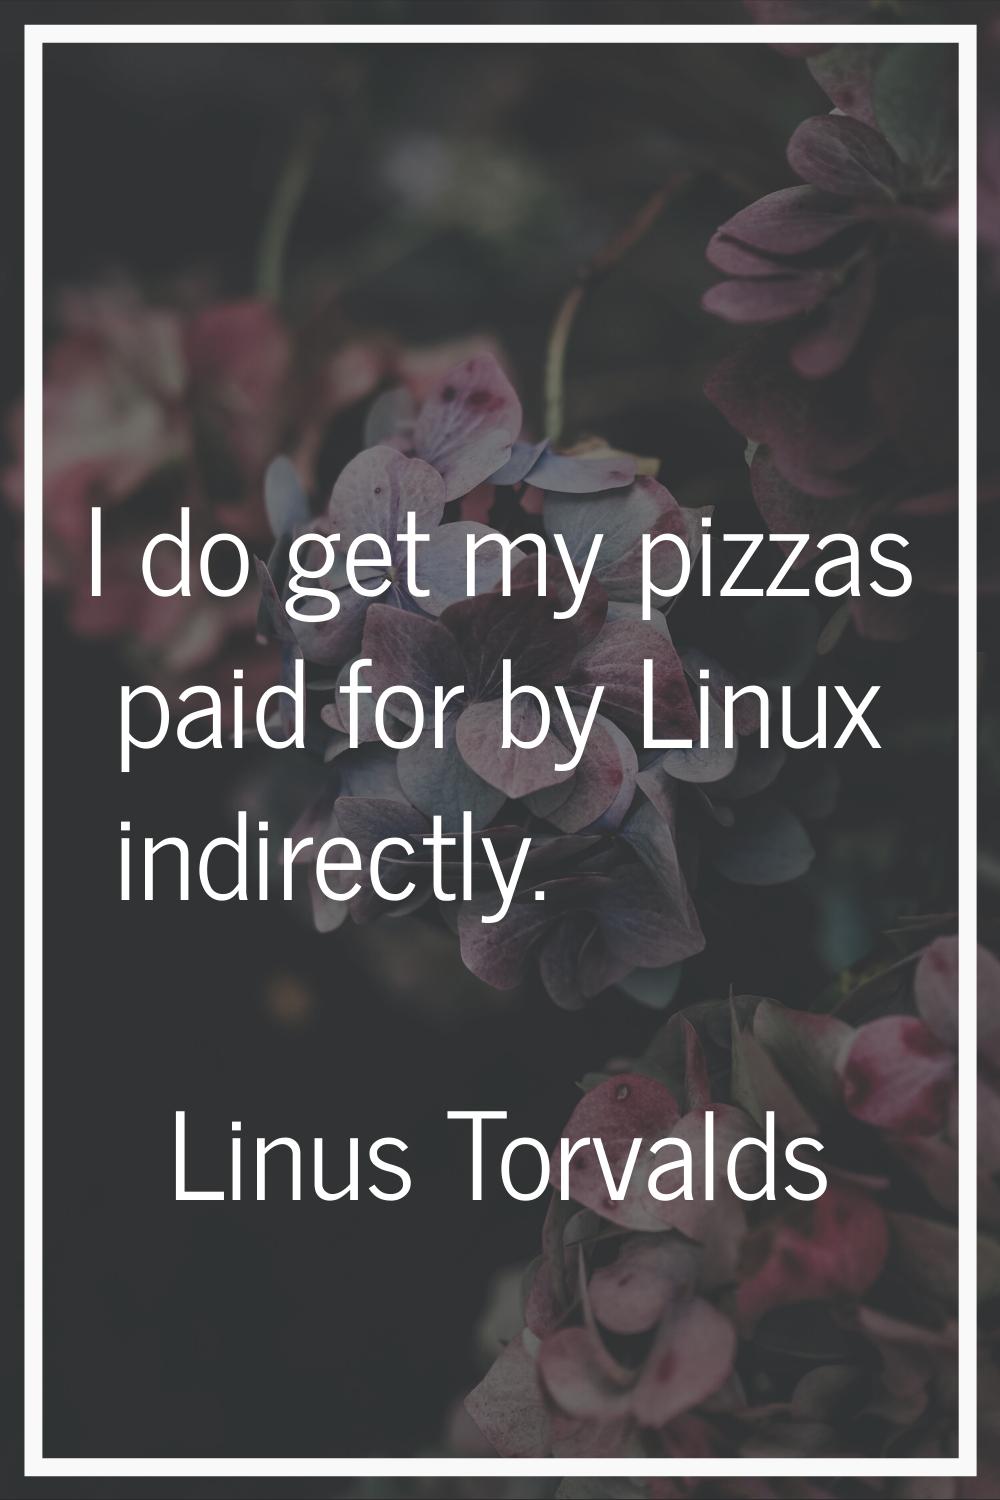 I do get my pizzas paid for by Linux indirectly.